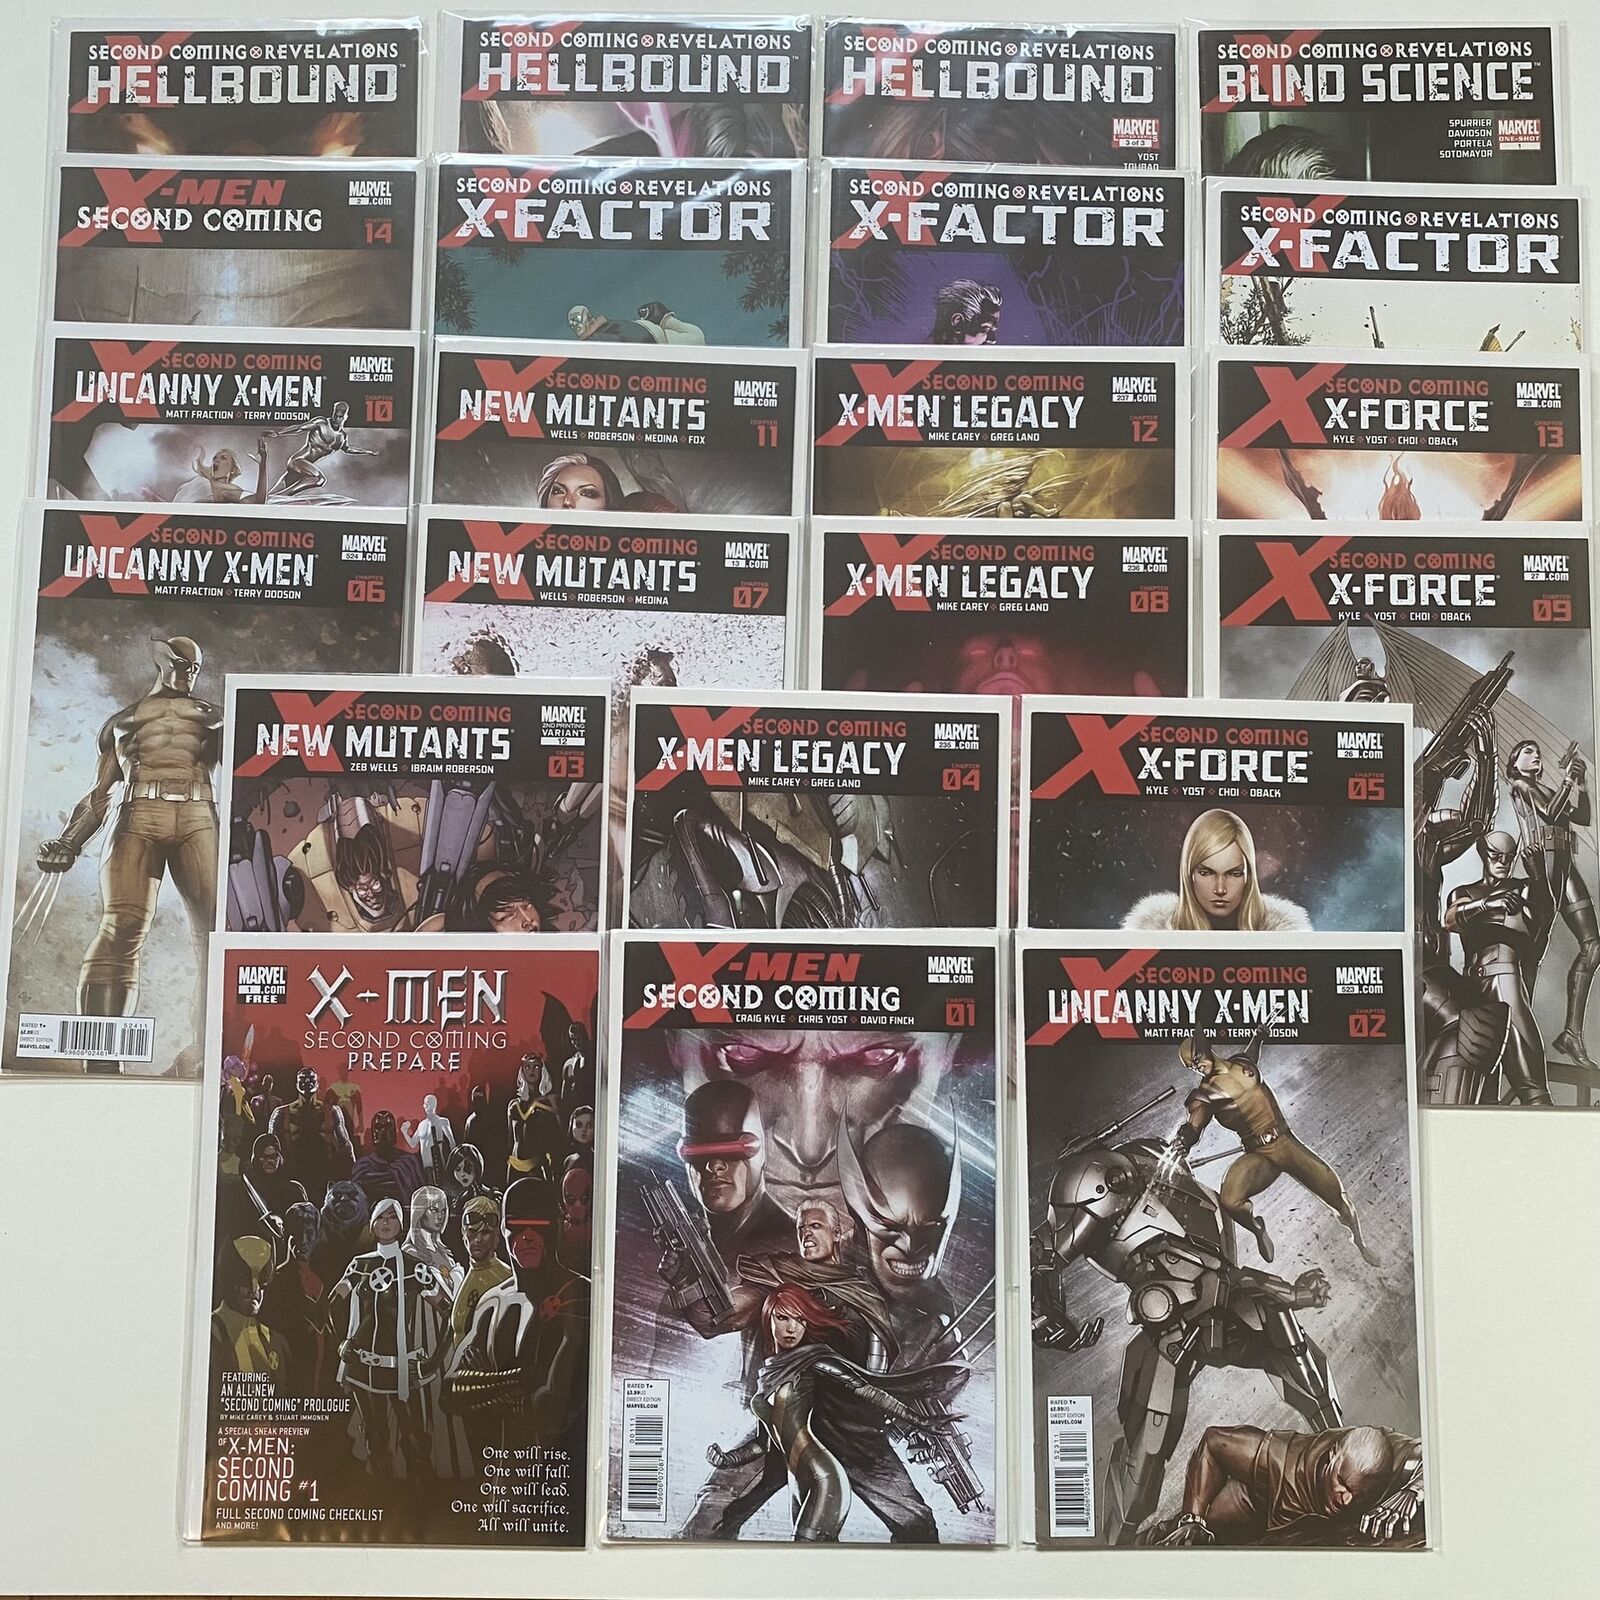 X-Men Second Coming 1 - 14 Complete Storyline 2010 Tie-Ins Revelations Lot of 22